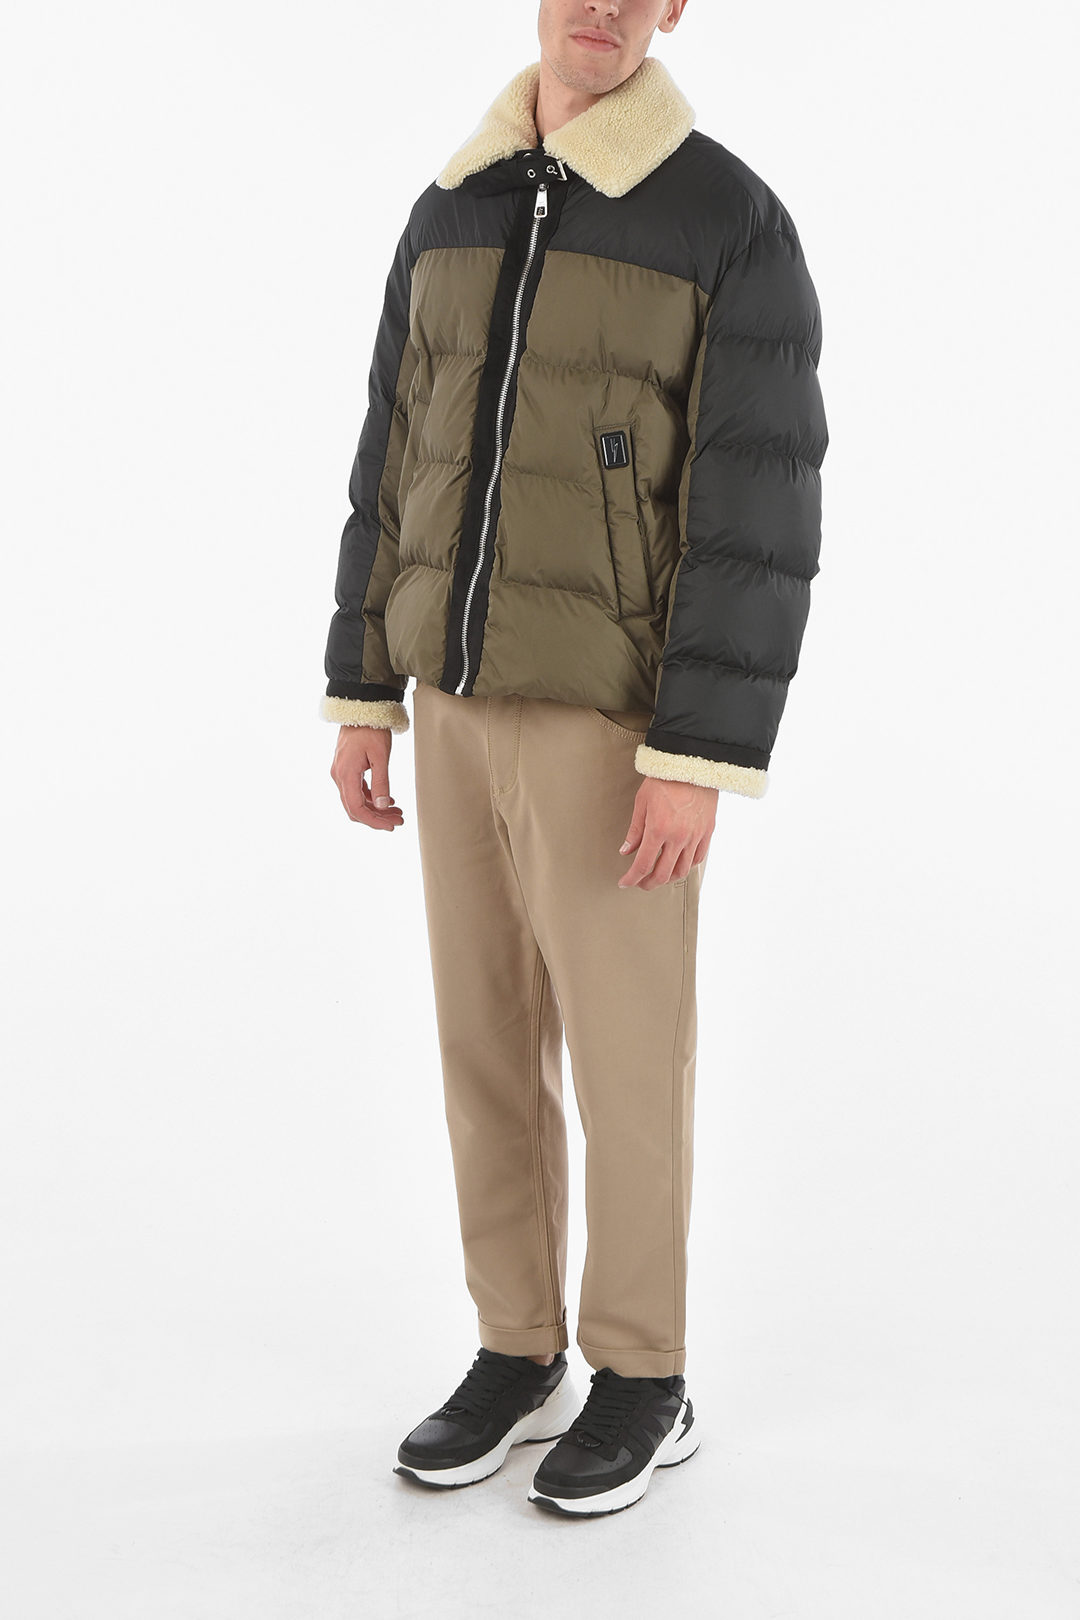 Neil Barrett Two-Tone PENFIELD Padded Jacket with Faux Fur collar men ...